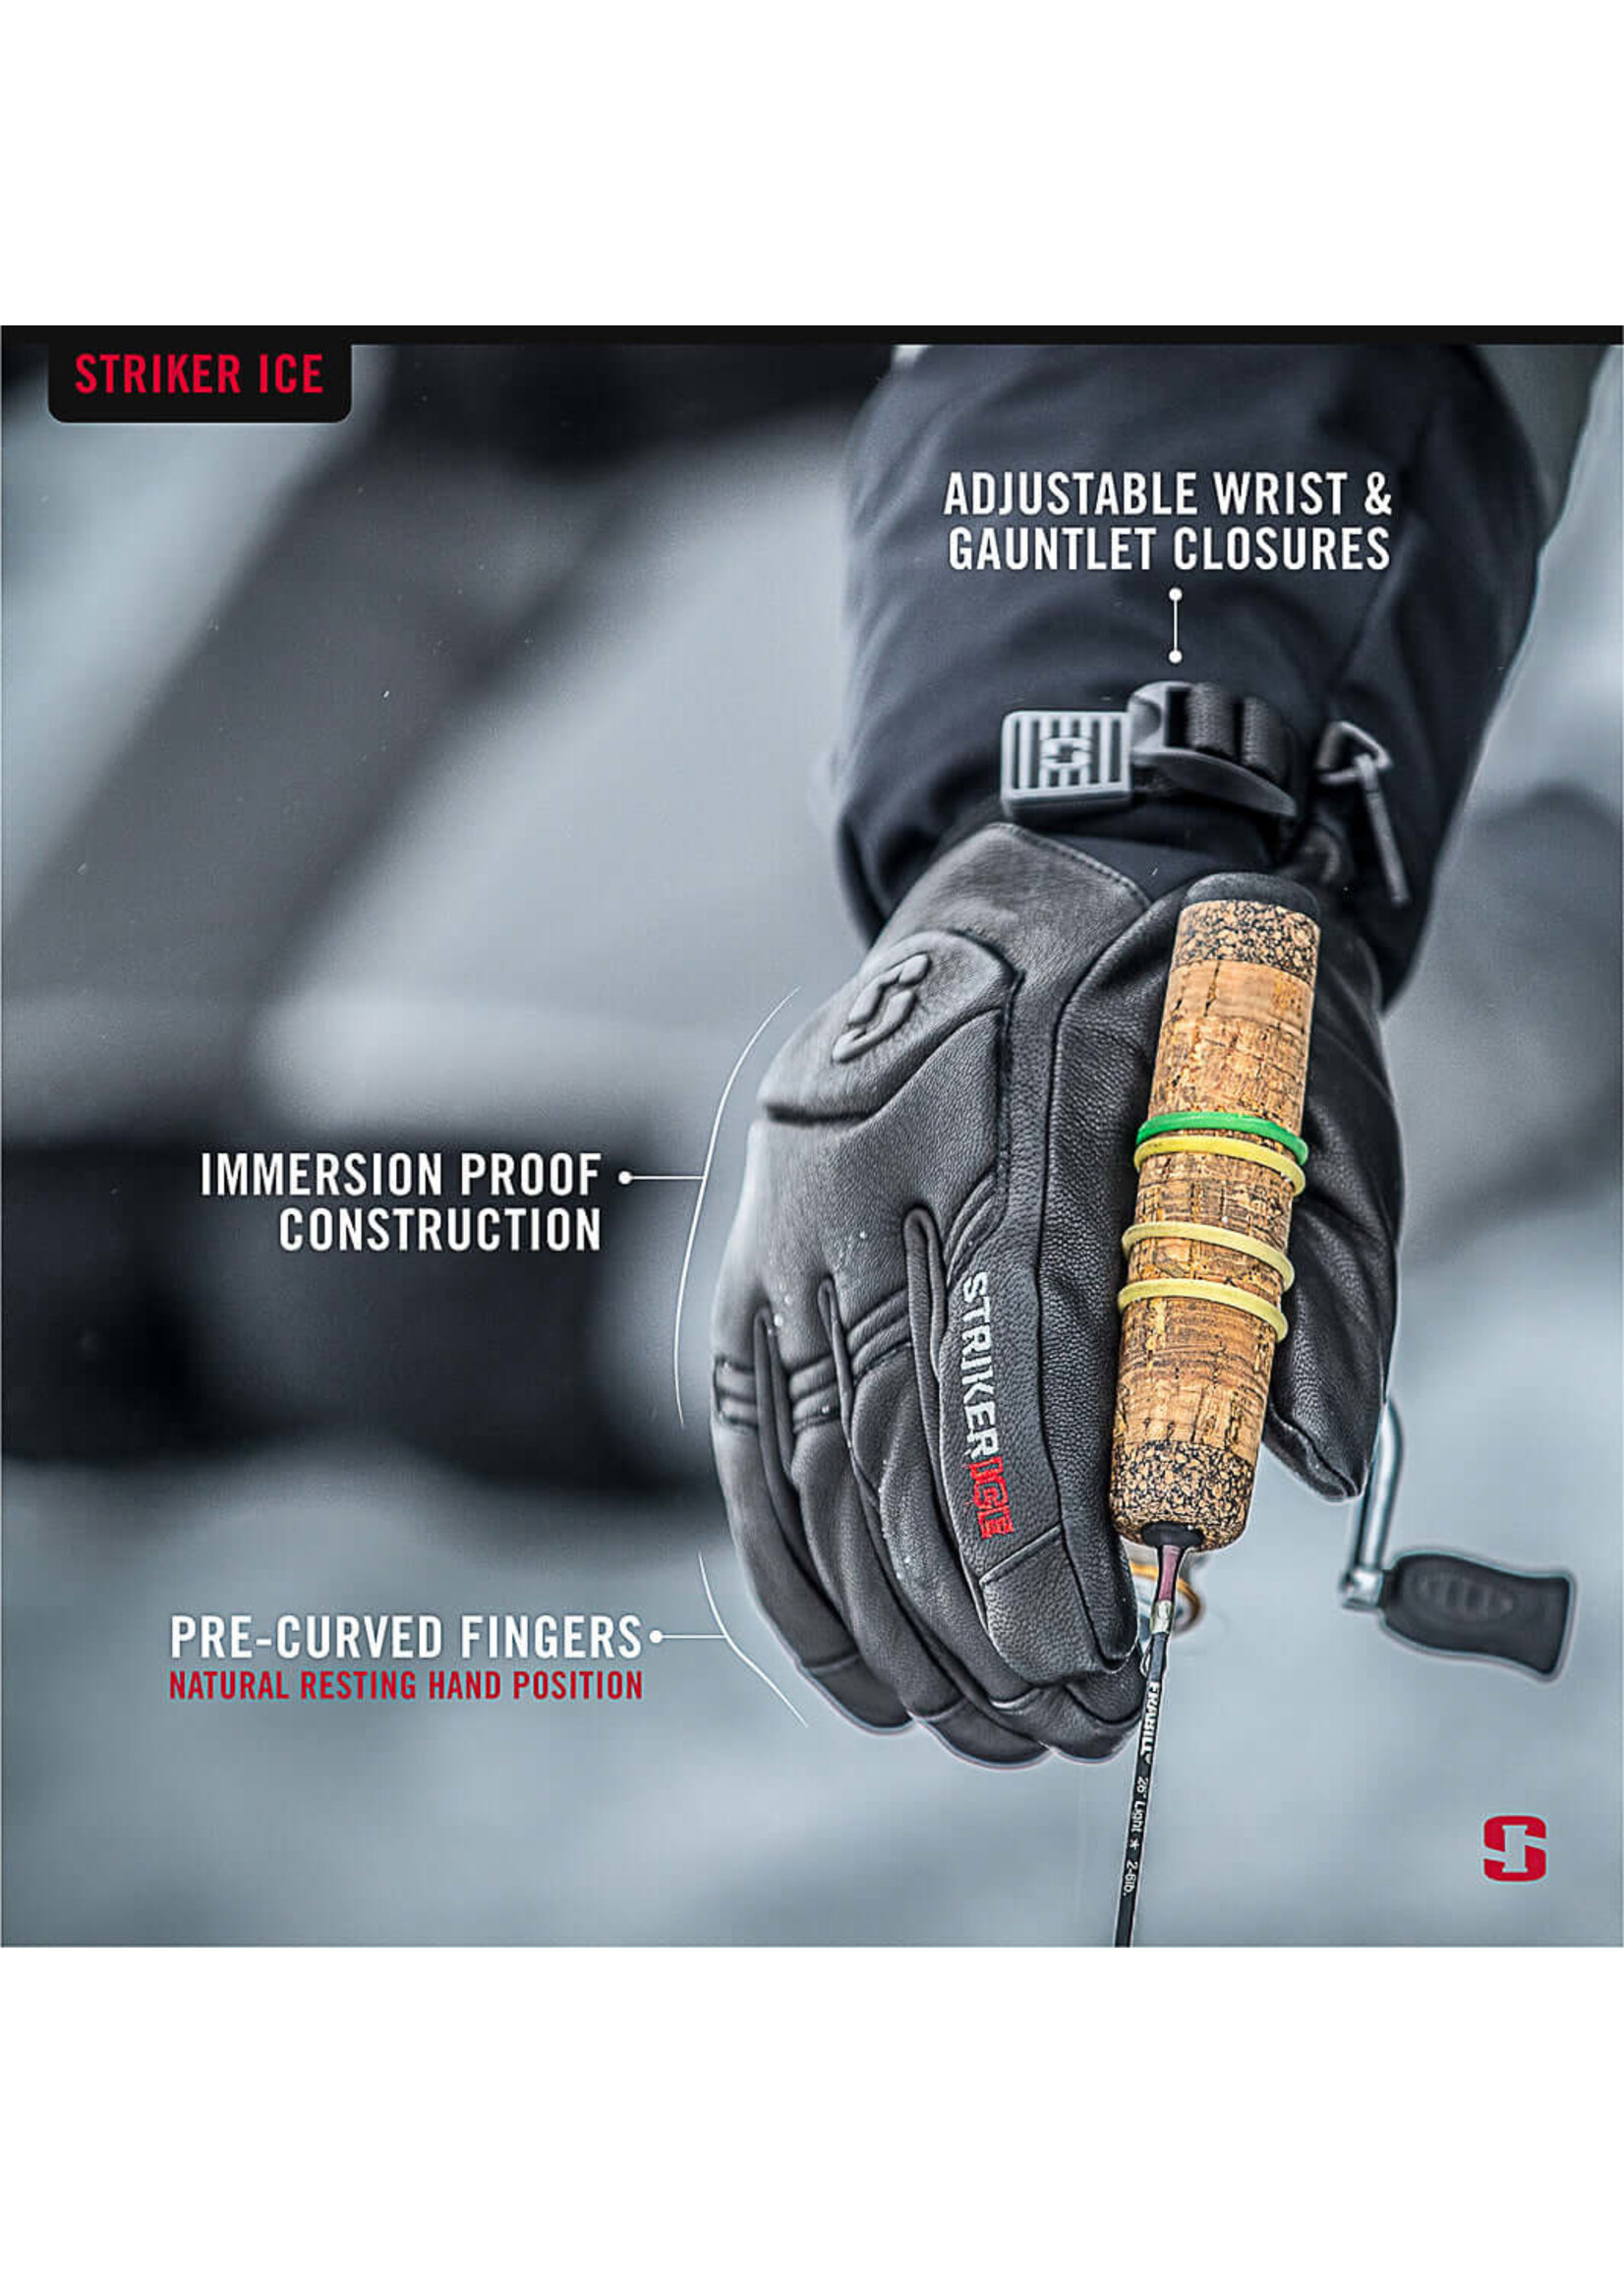 Striker Unisex Combat Waterproof Breathable Insulated Ice Fishing Gloves  with Adjustable Wrist and Gauntlet Closure